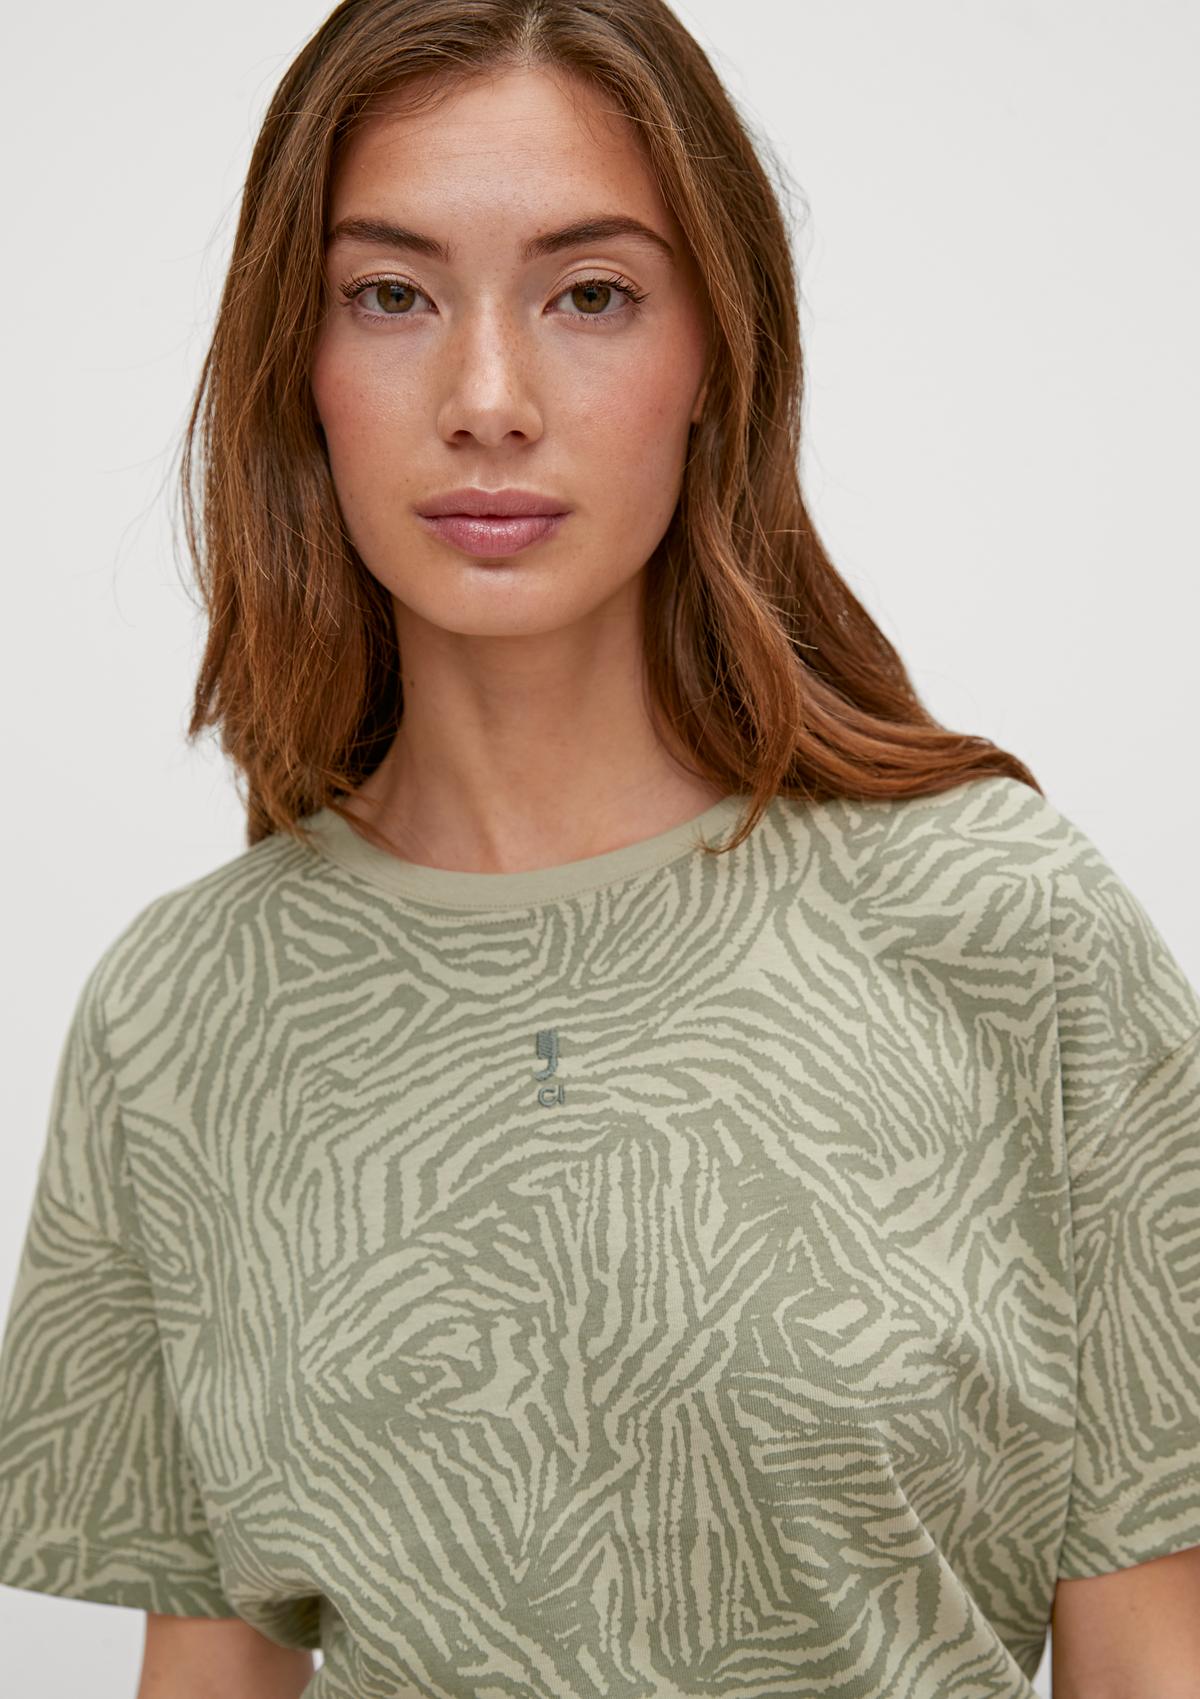 T-shirt in a loose fit - pale green | Comma